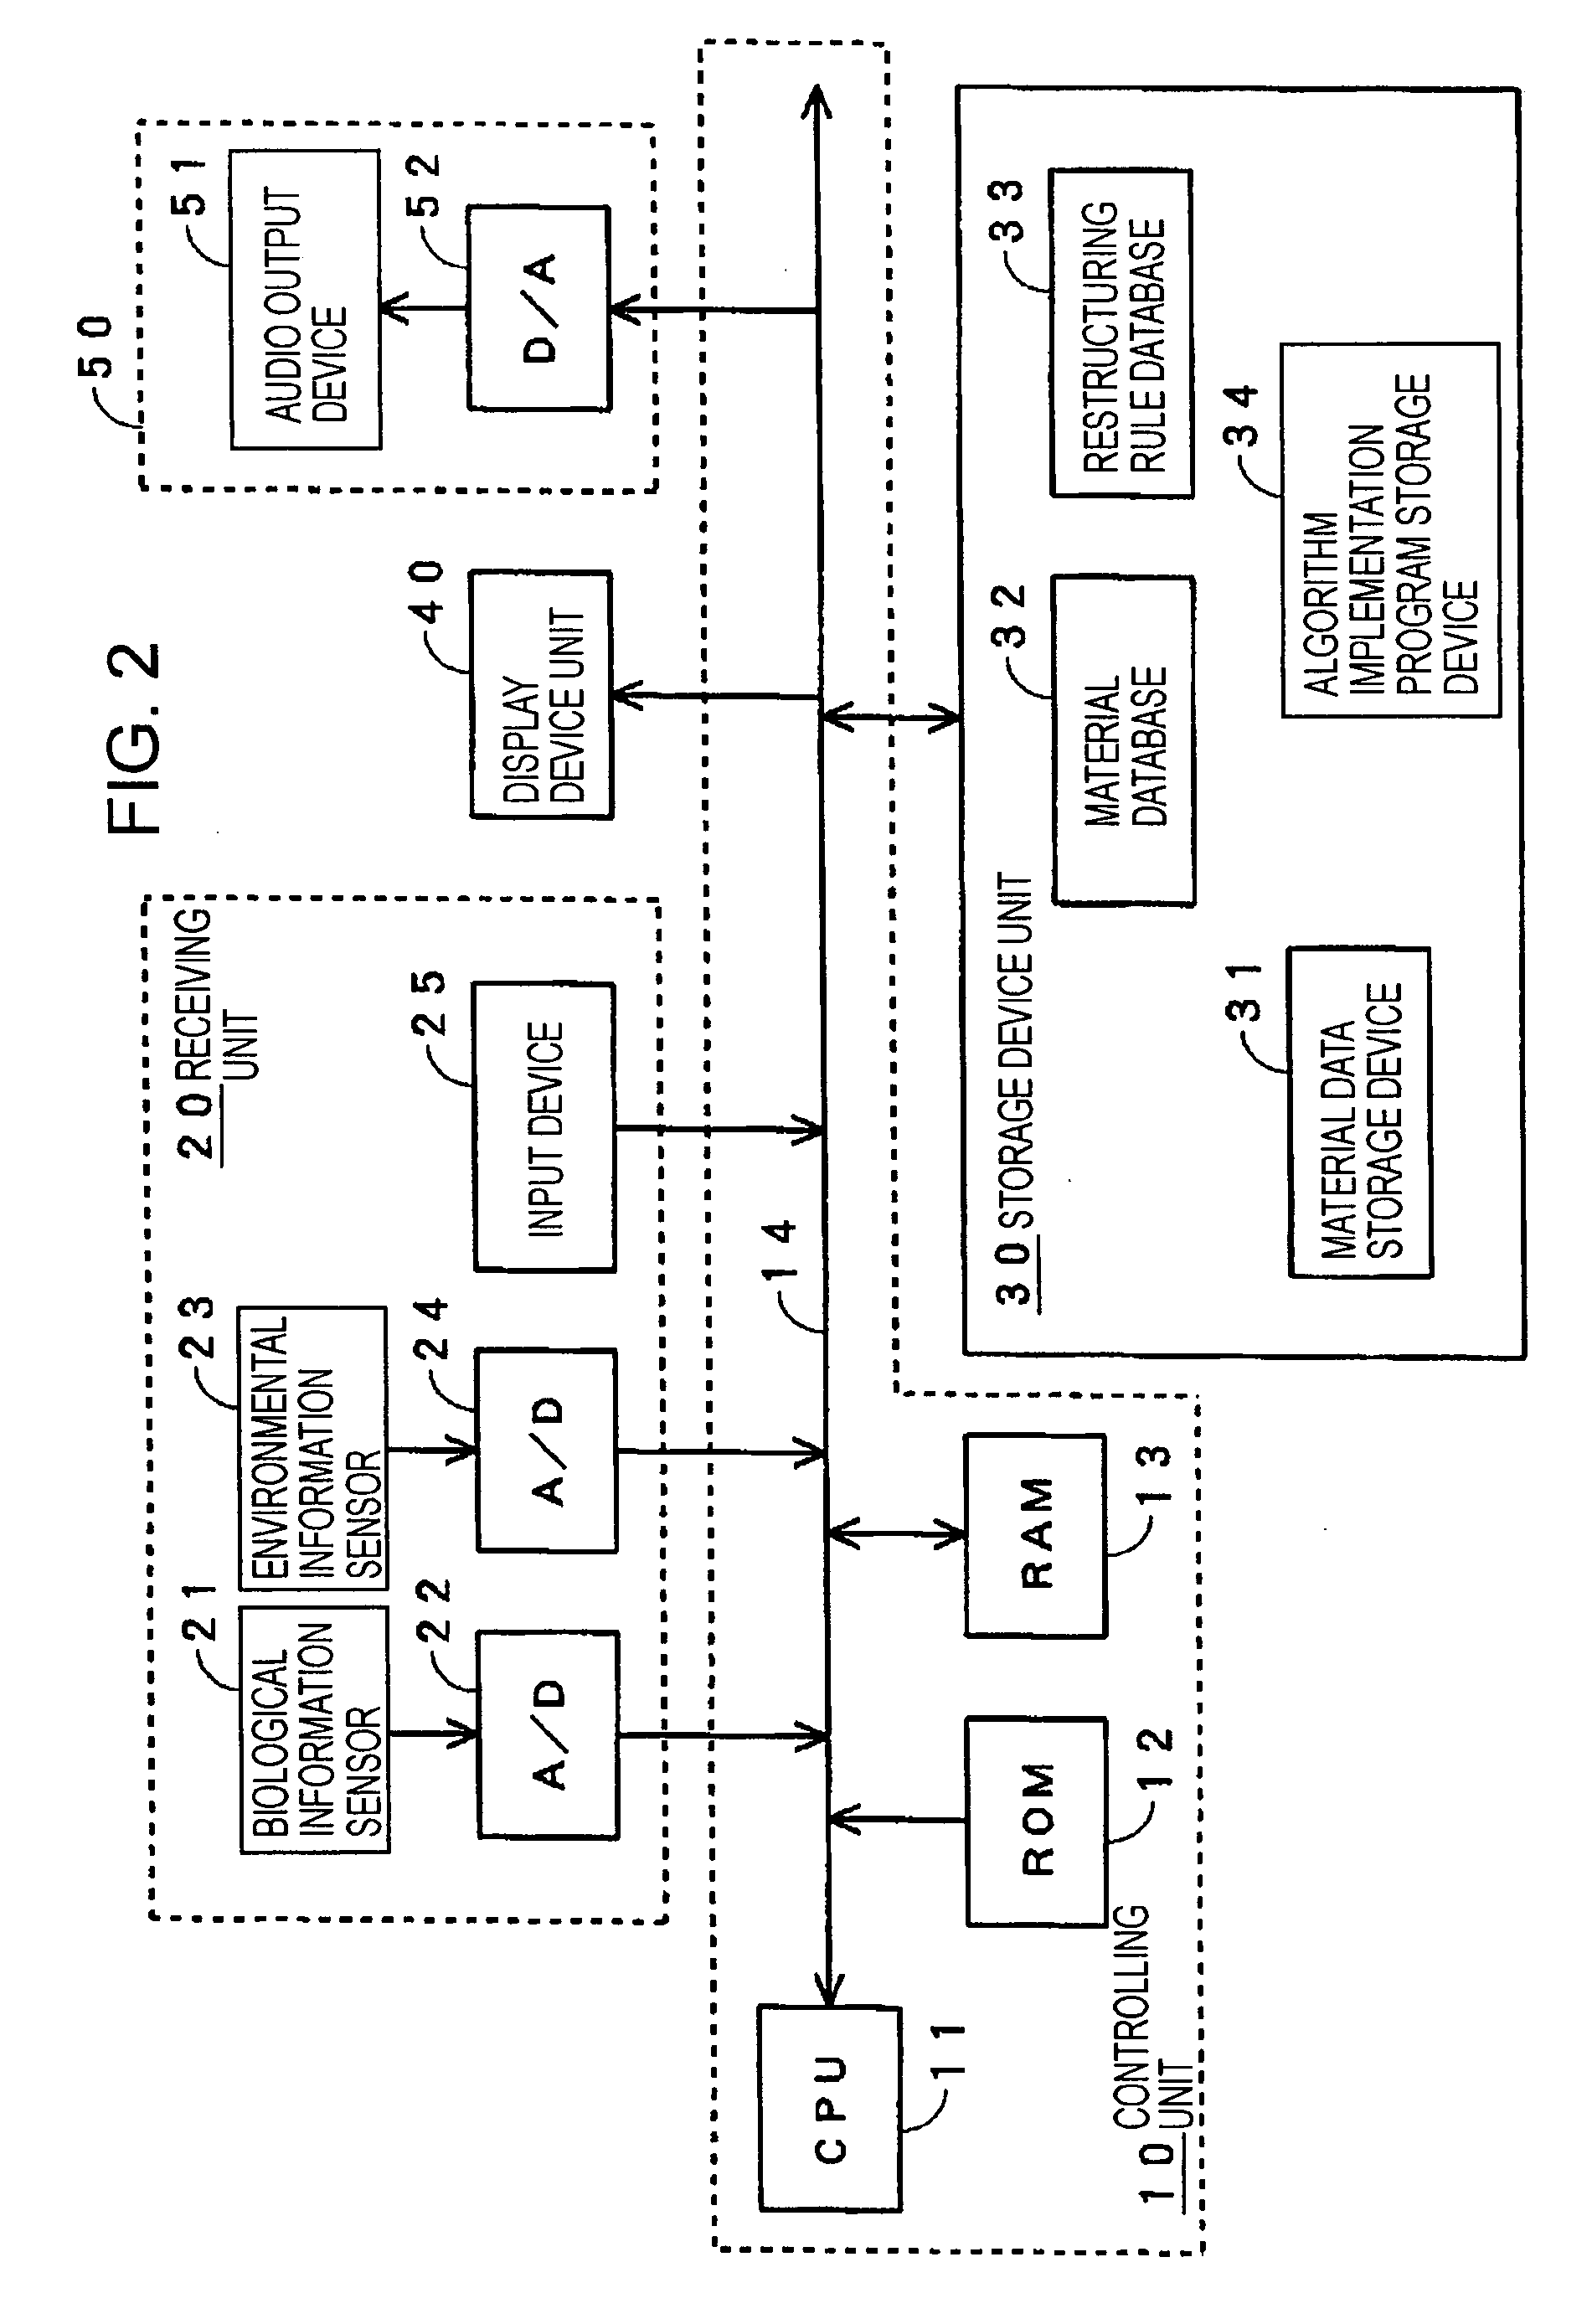 Apparatus and Method of Creating Content